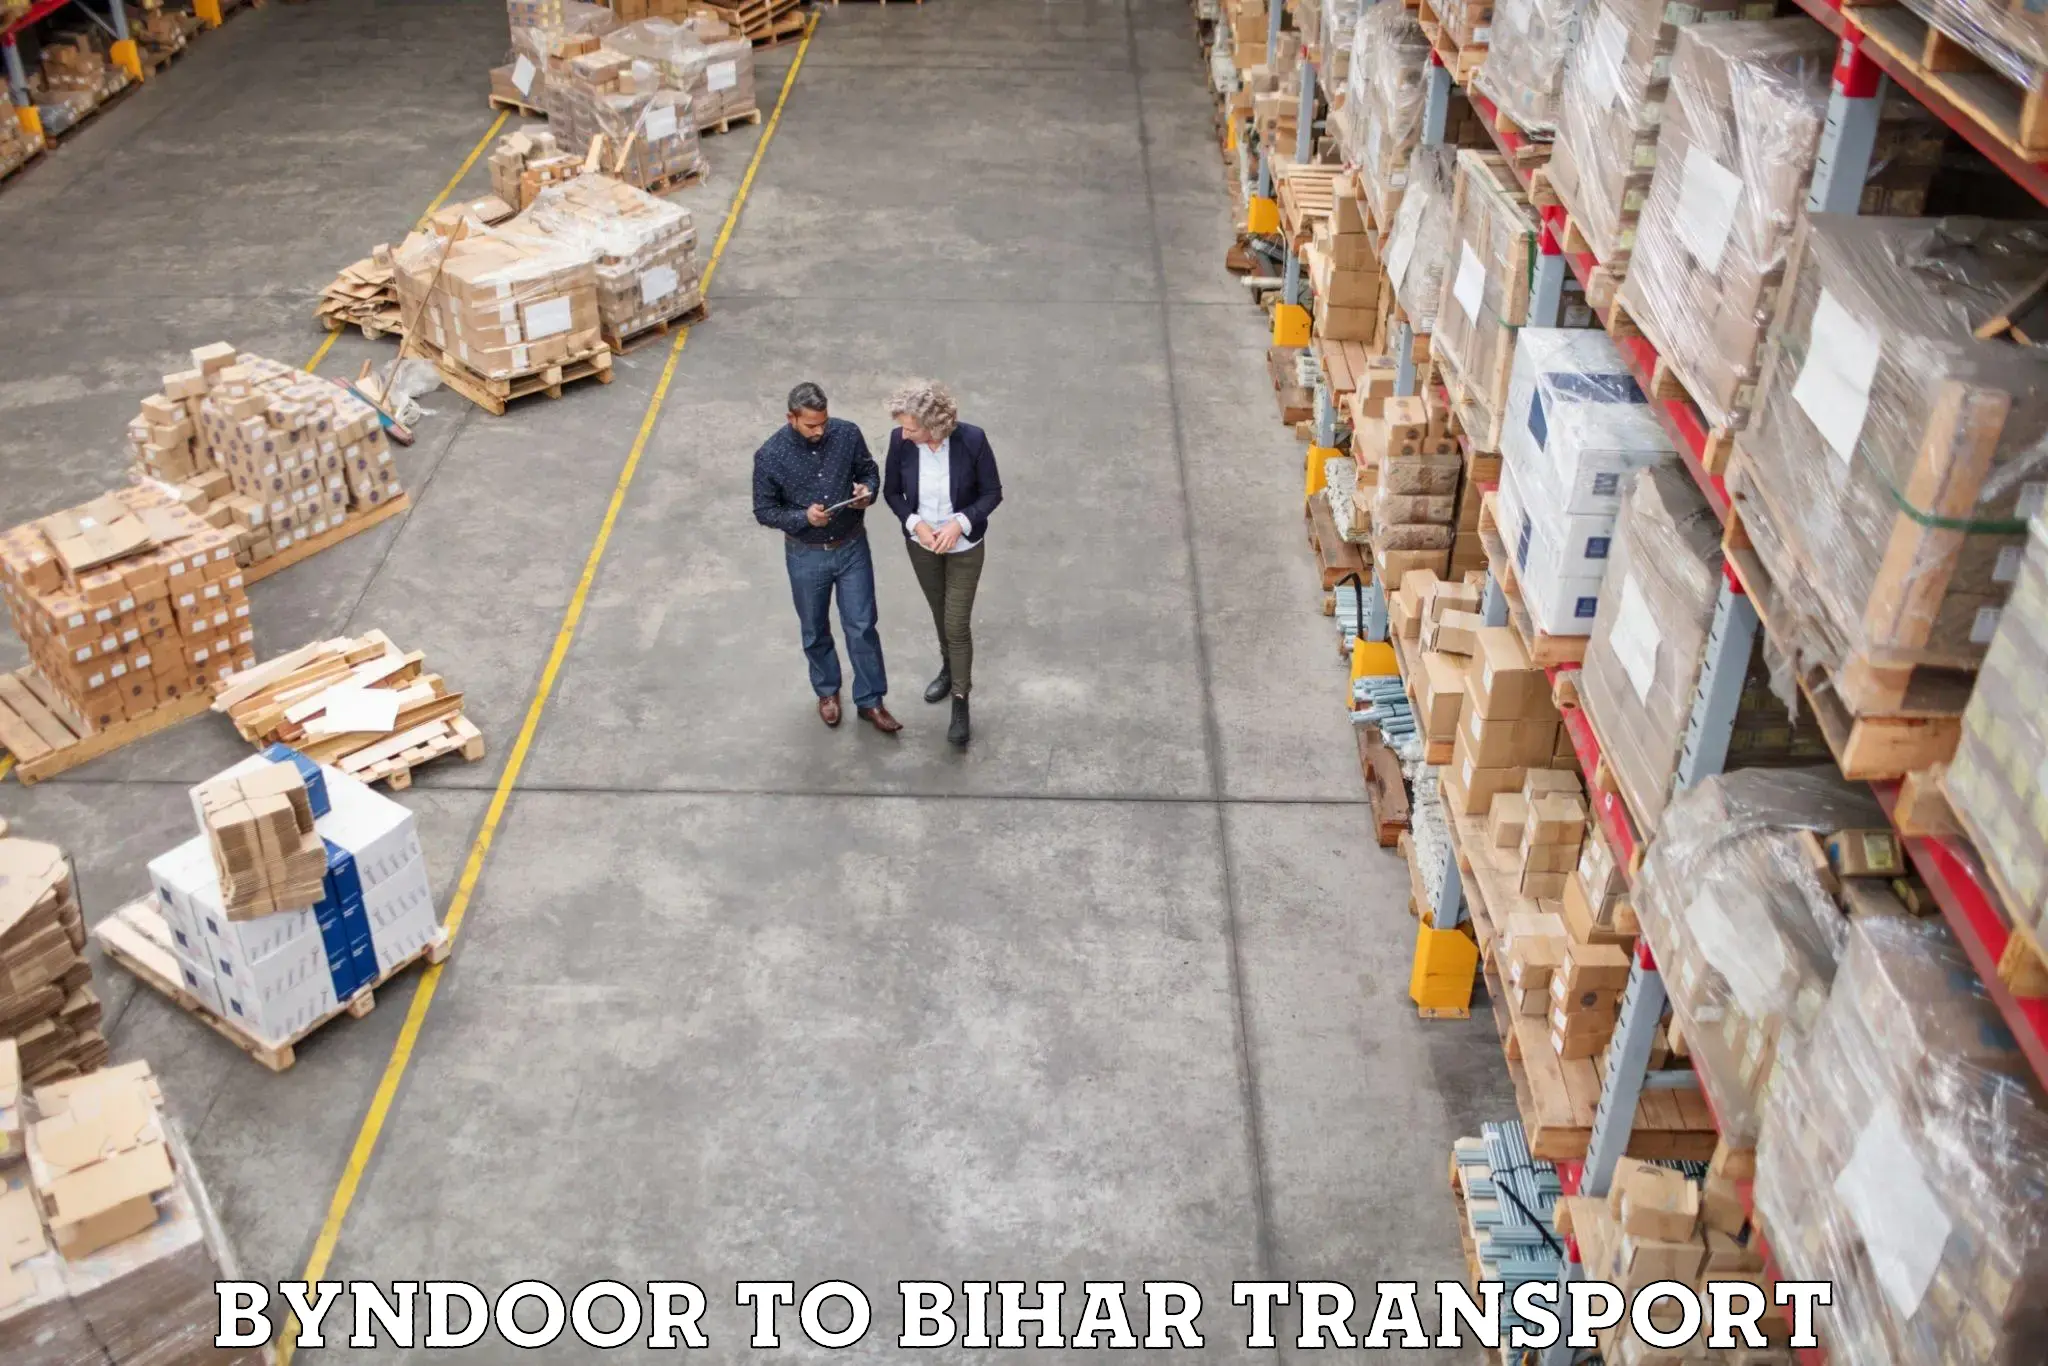 Daily parcel service transport Byndoor to Darbhanga